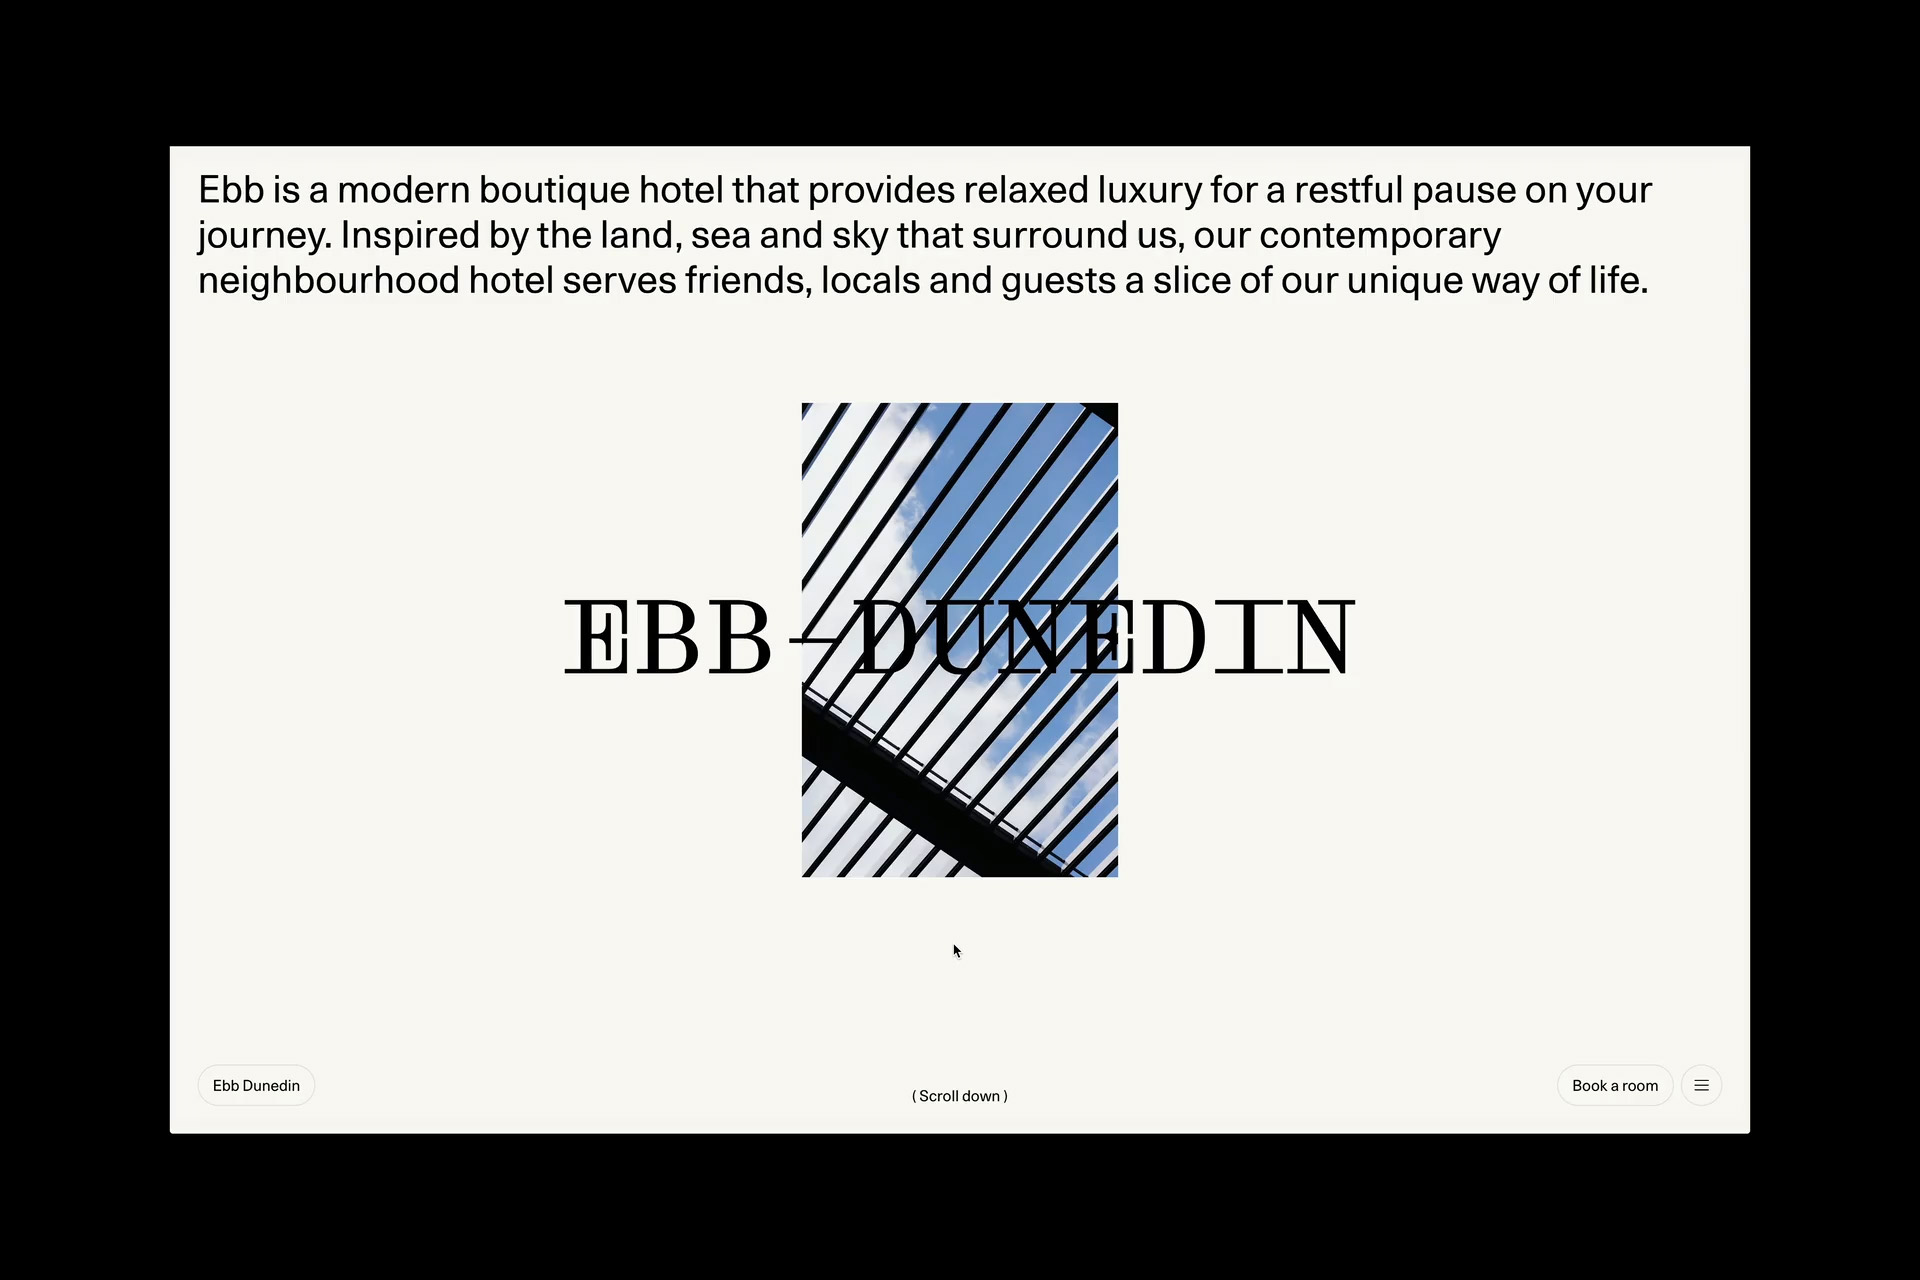 Brand identity and website designed by Maud for contemporary New Zealand hotel Ebb Dunedin